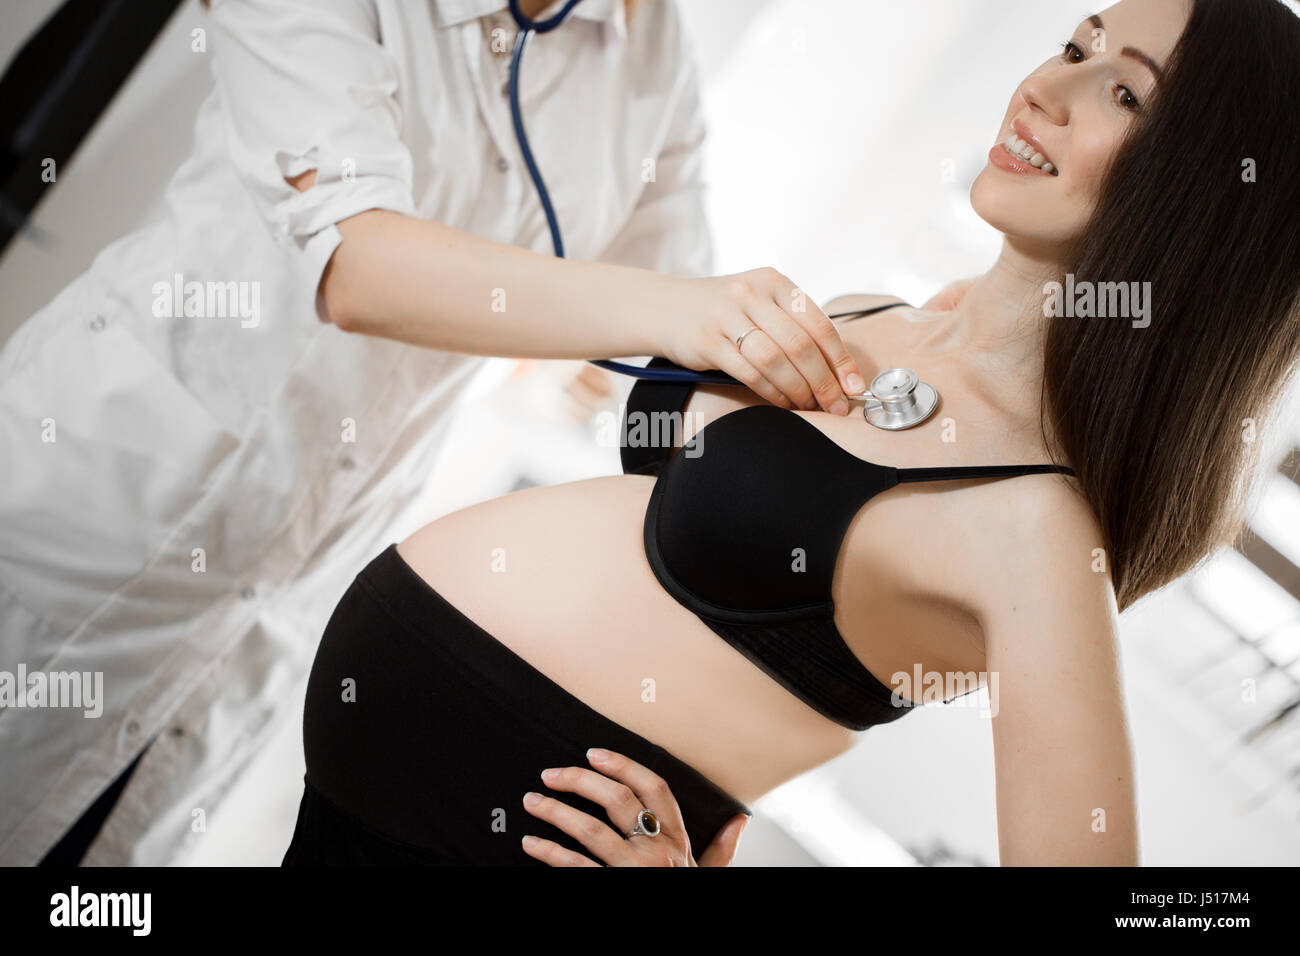 female medicine doctor holding stethoscope to pregnant woman standing for encouragement, empathy, cheering,support, medical examination. New life of abortion concept. Stock Photo